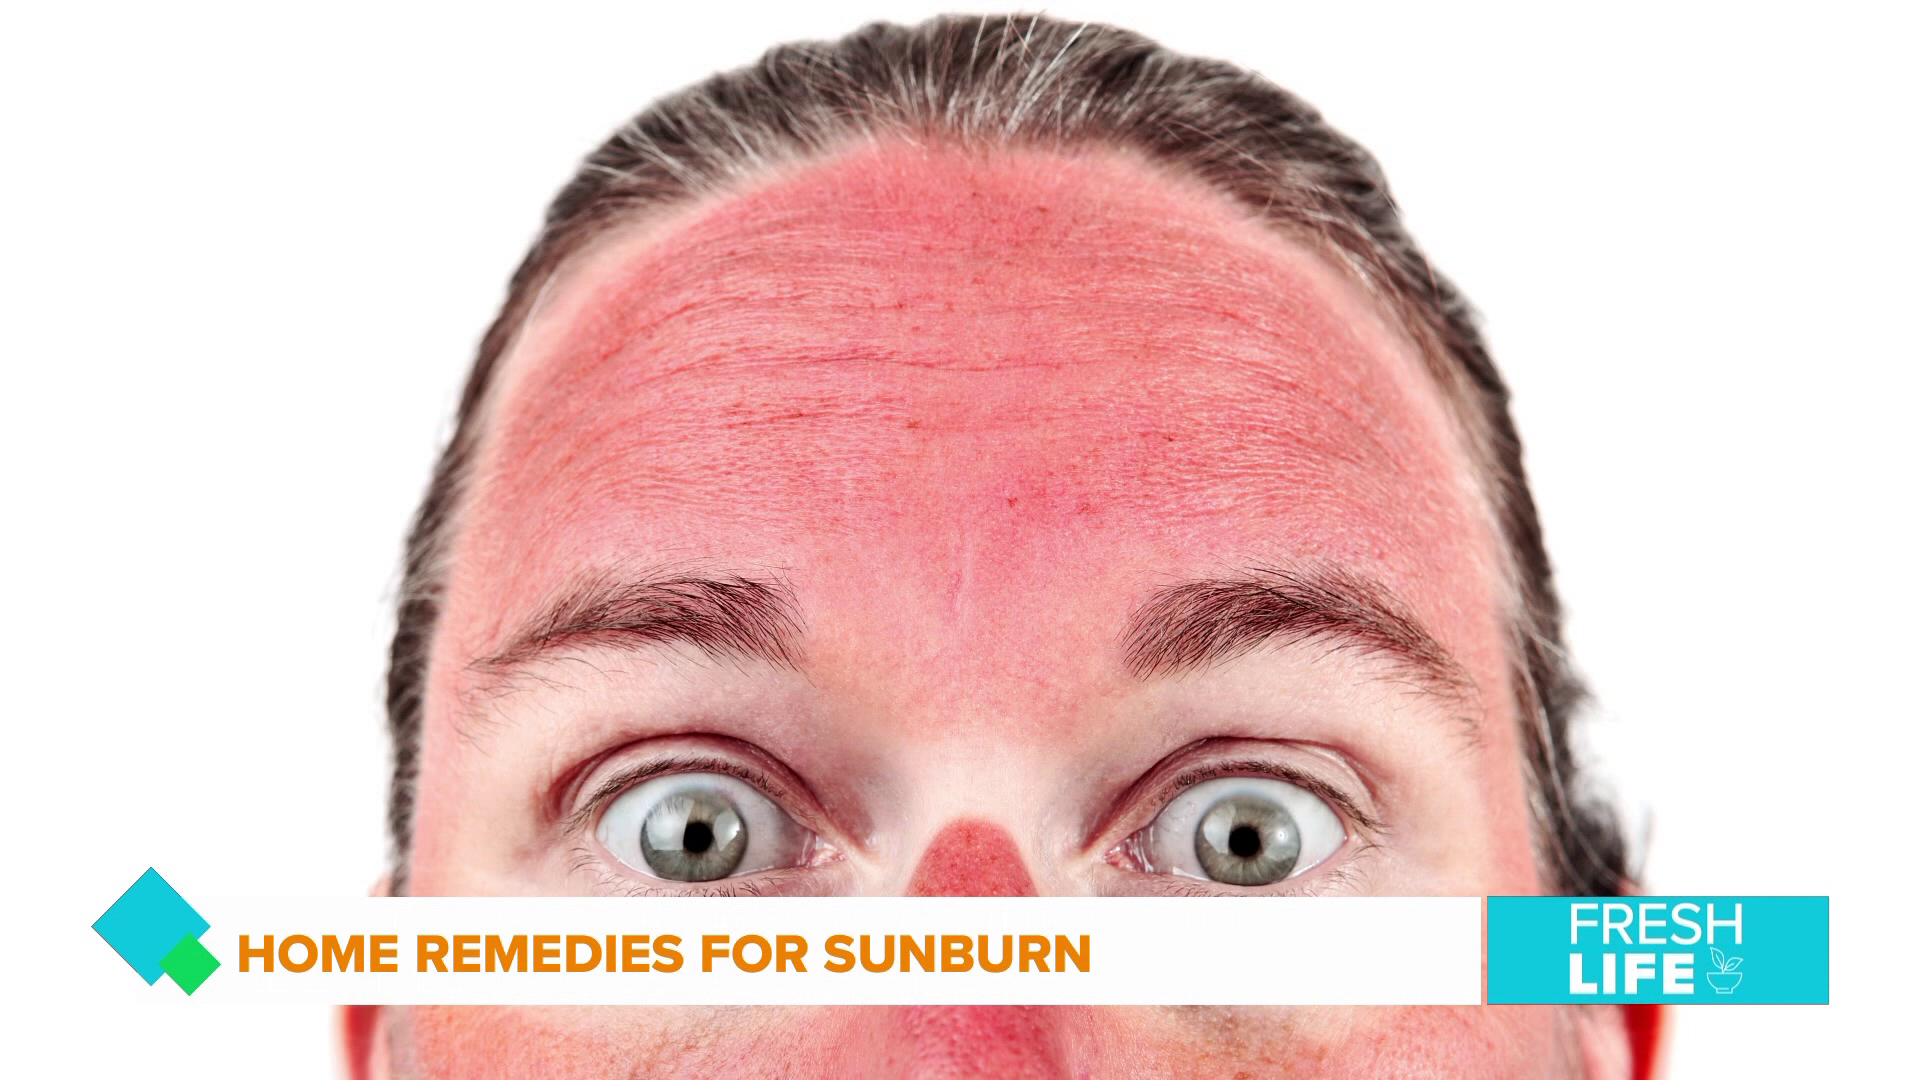 As the weather is heating up, make sure you're using sunscreen! But if you happen to get a sunburn, do you know the best ways to treat it?